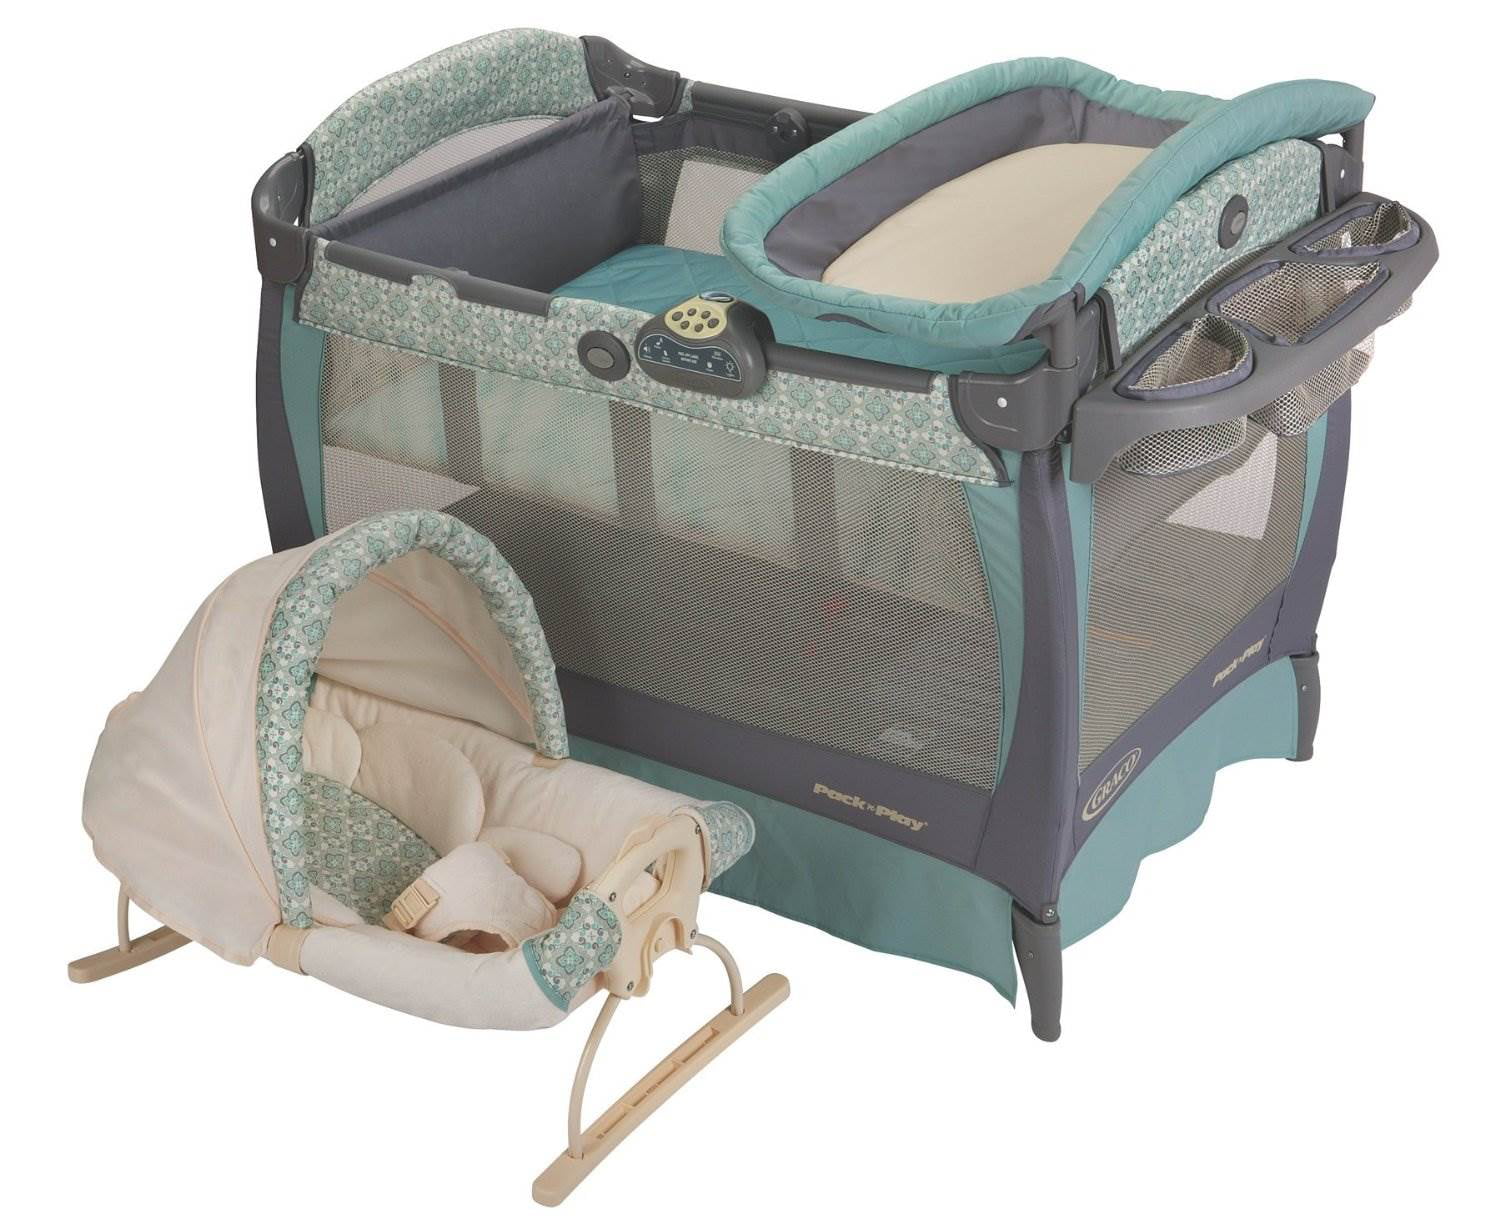 Graco Pack 'n Play Playard with Cuddle Cove Removable Rocking Seat Glacier 